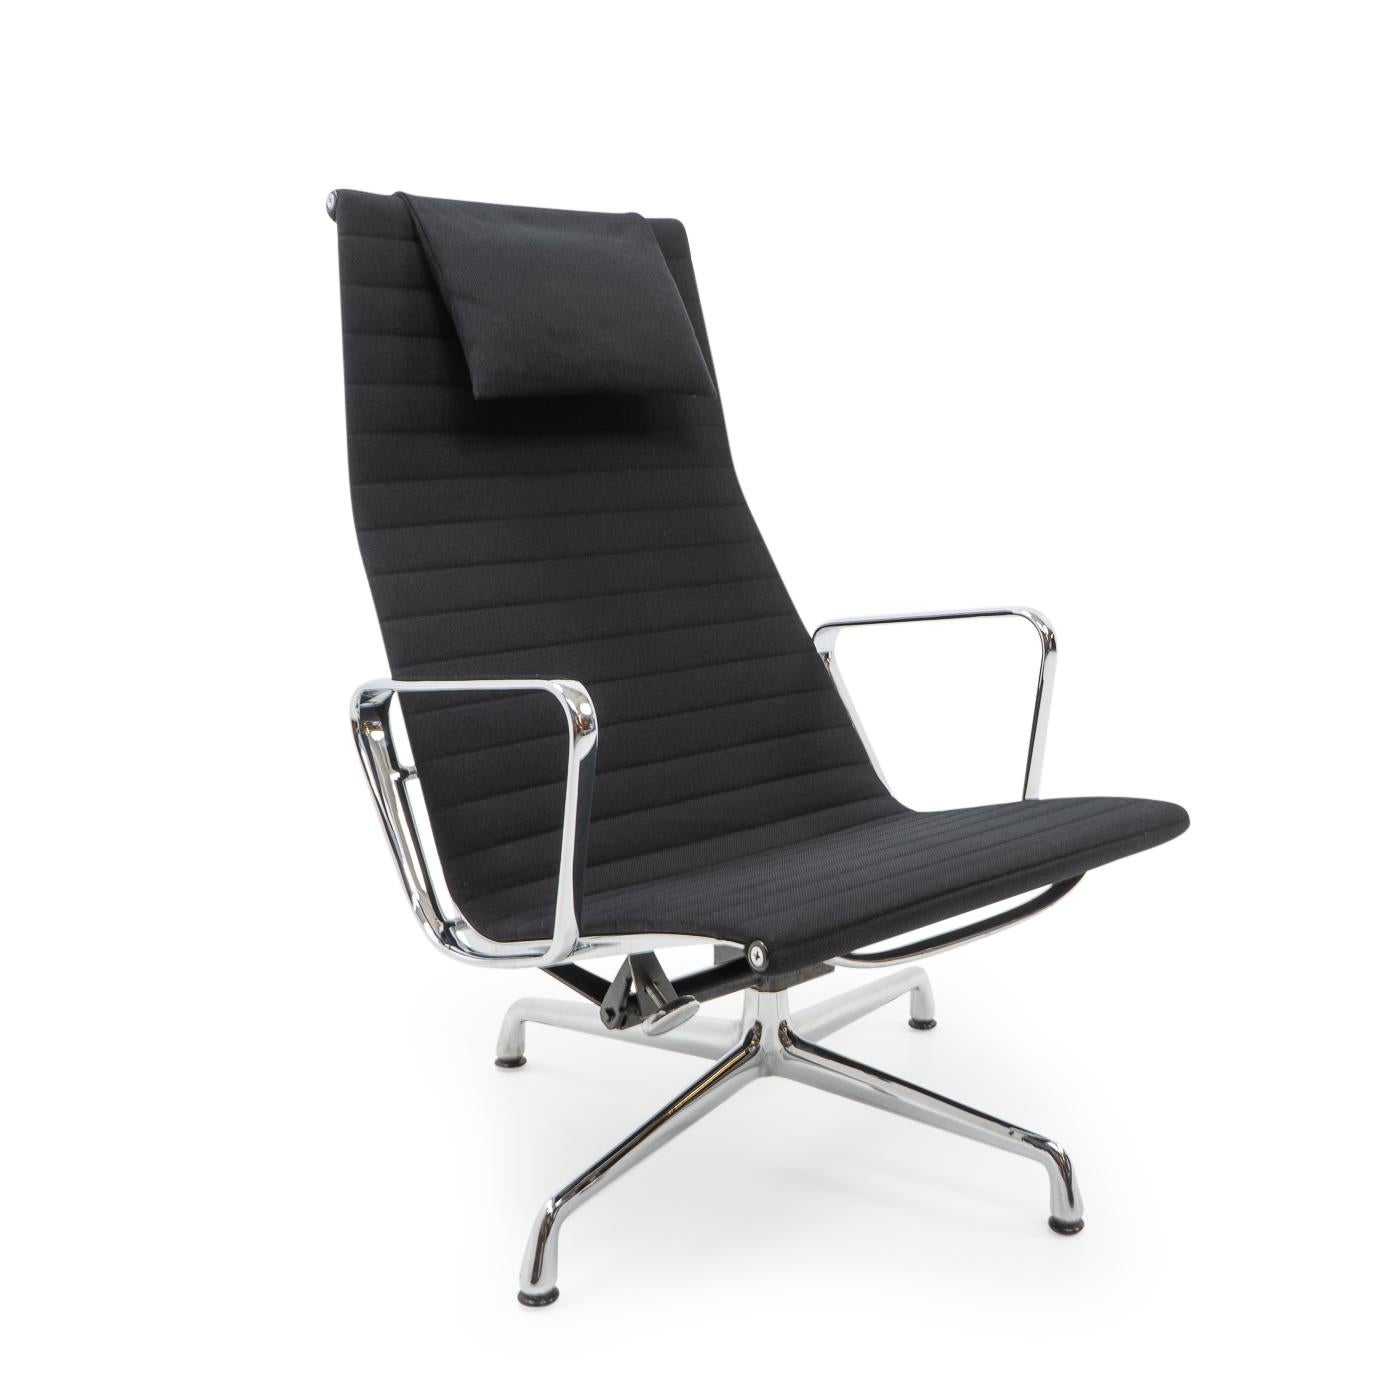 The Aluminum Group chairs by Charles & Ray Eames are one of the most important designs of the 20th Century. Their original design from the 1950s is still relevant today, giving interiors all over the world a touch of modern elegance.

On offer we